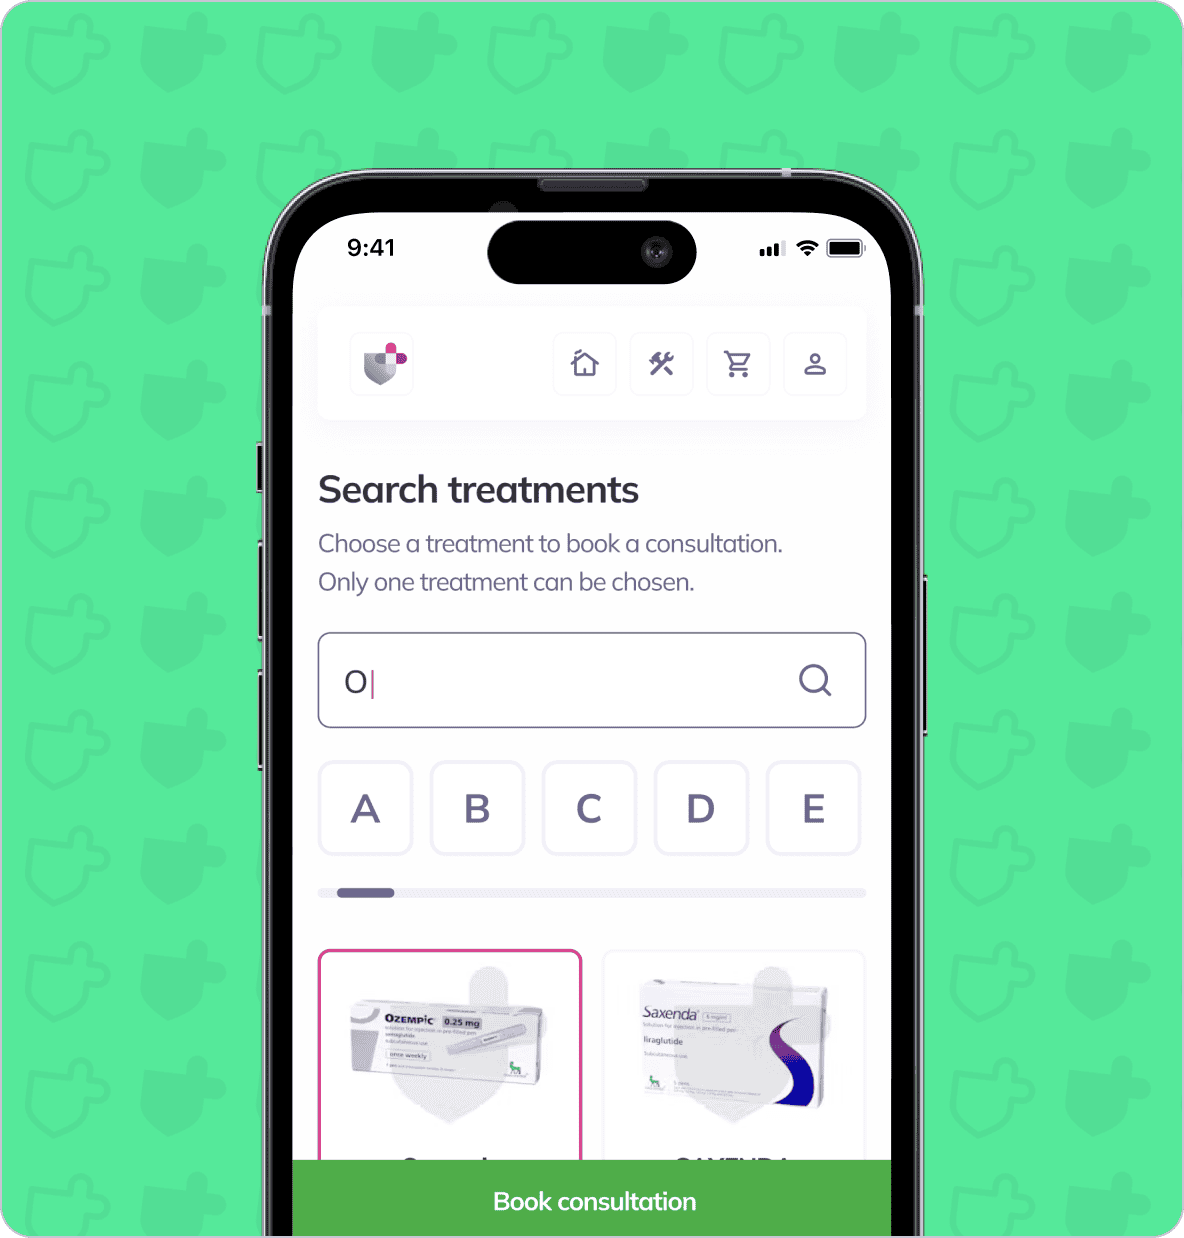 Smartphone screen displays a search function for medical treatments, with options to choose and book a consultation. The background is green with shield icons.